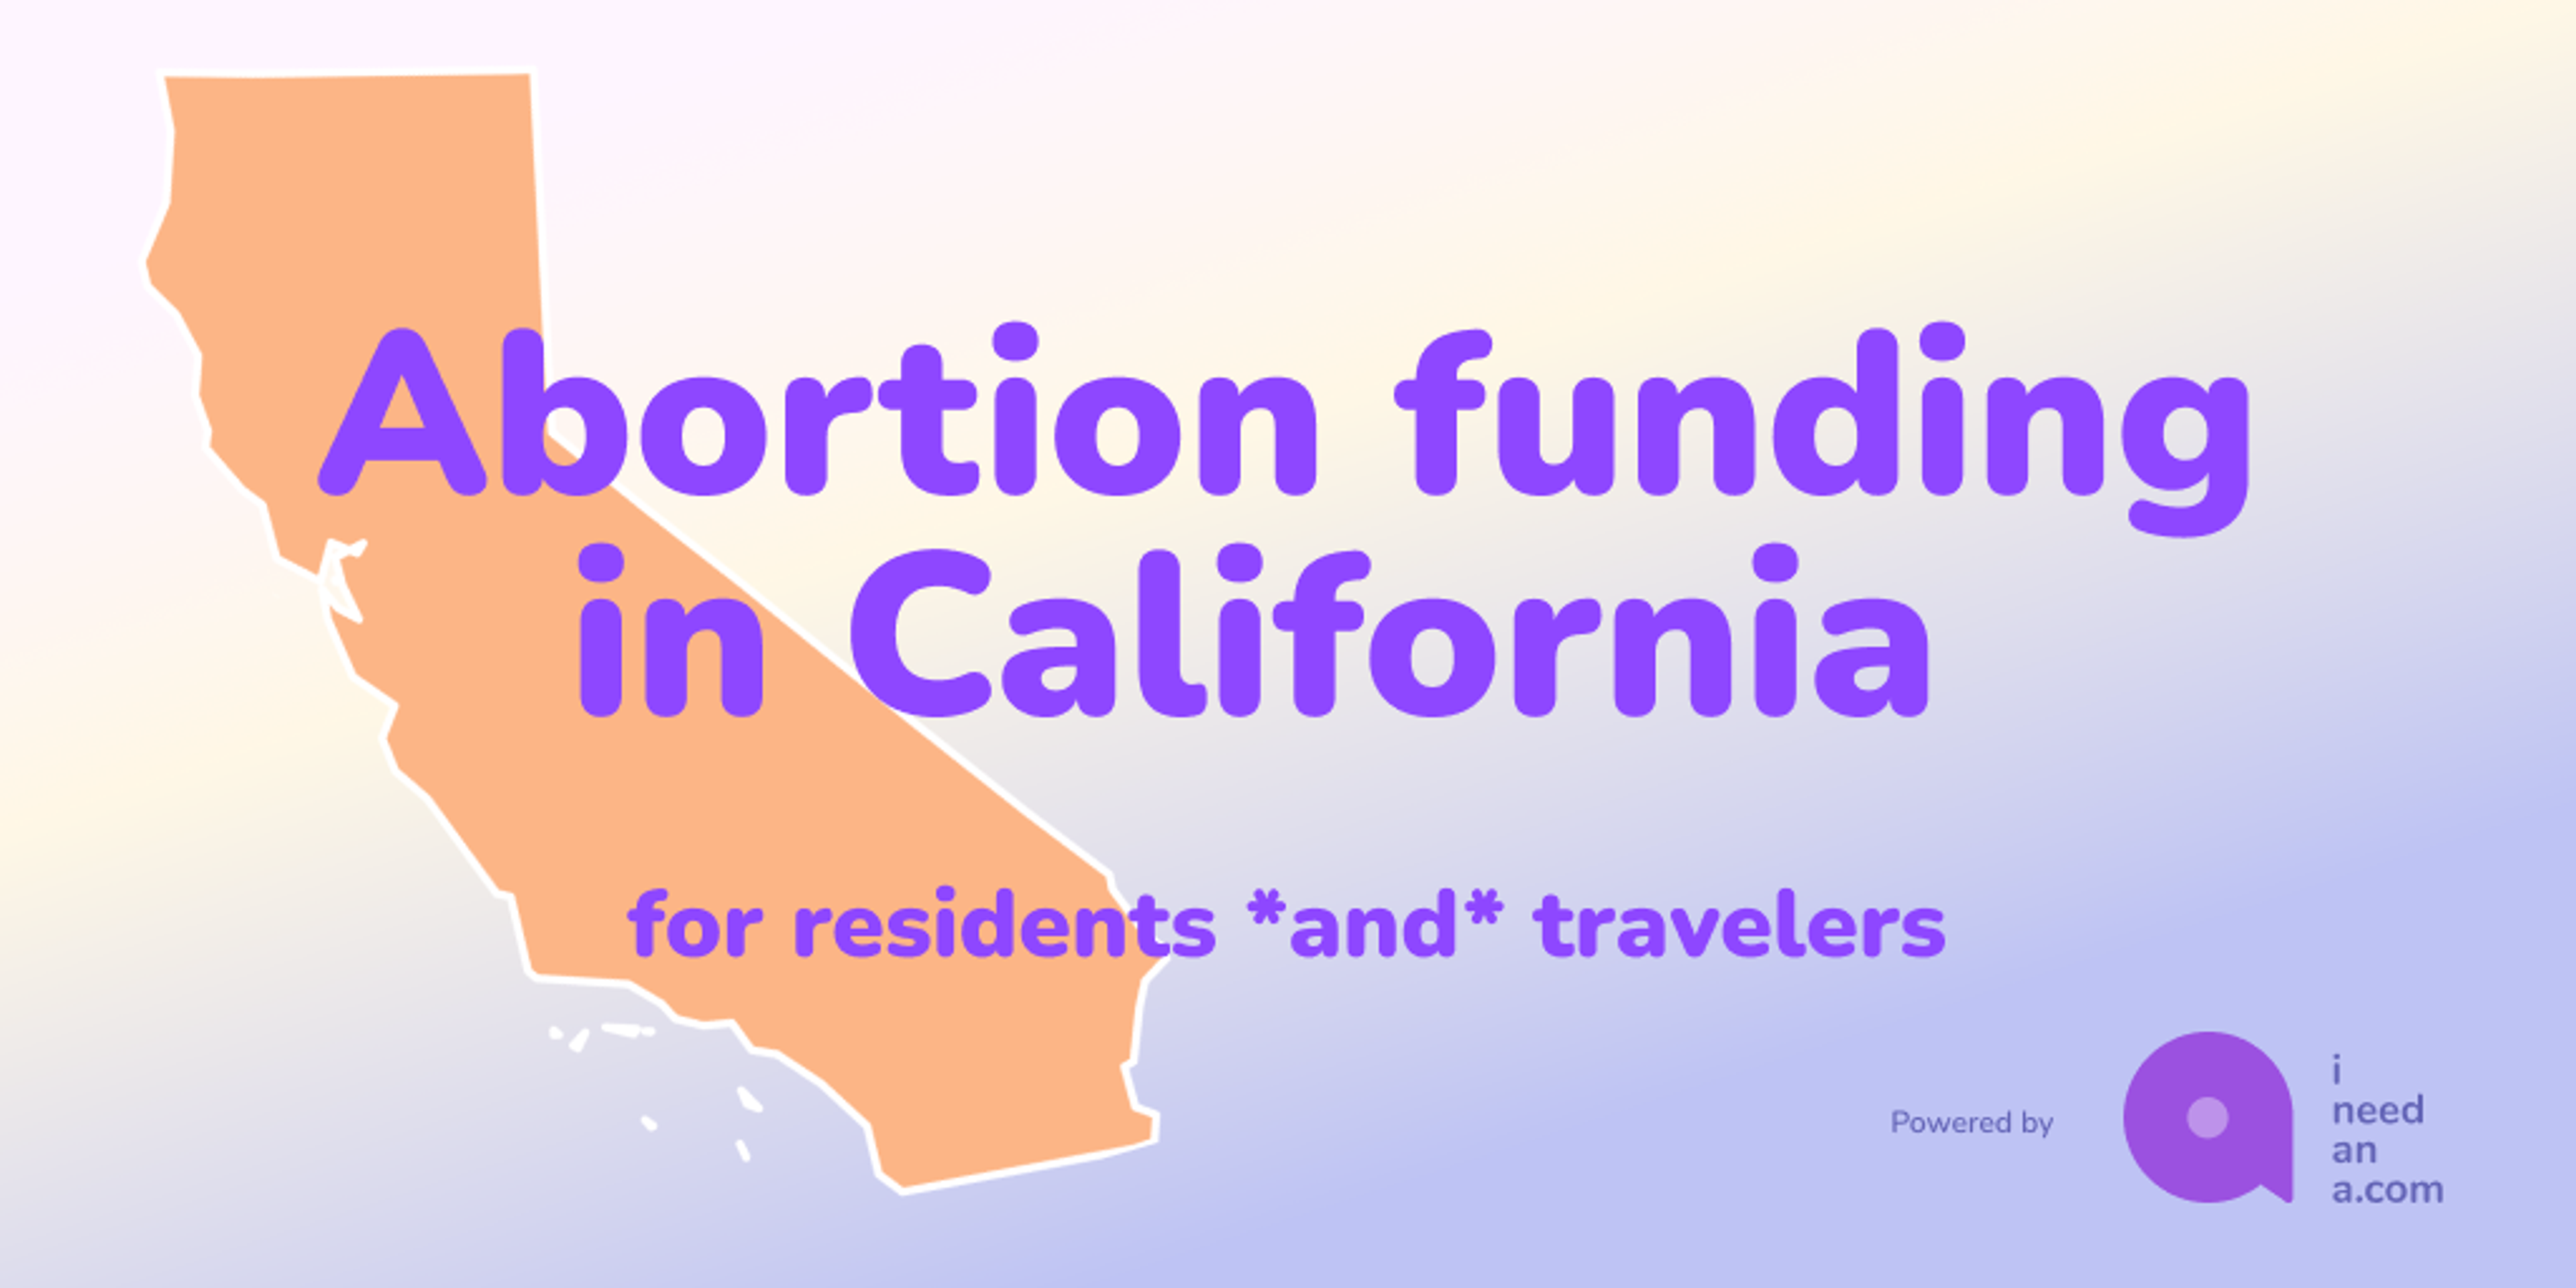 Need money for an abortion in California? Financial assistance is available for people who live in or are traveling to the state!